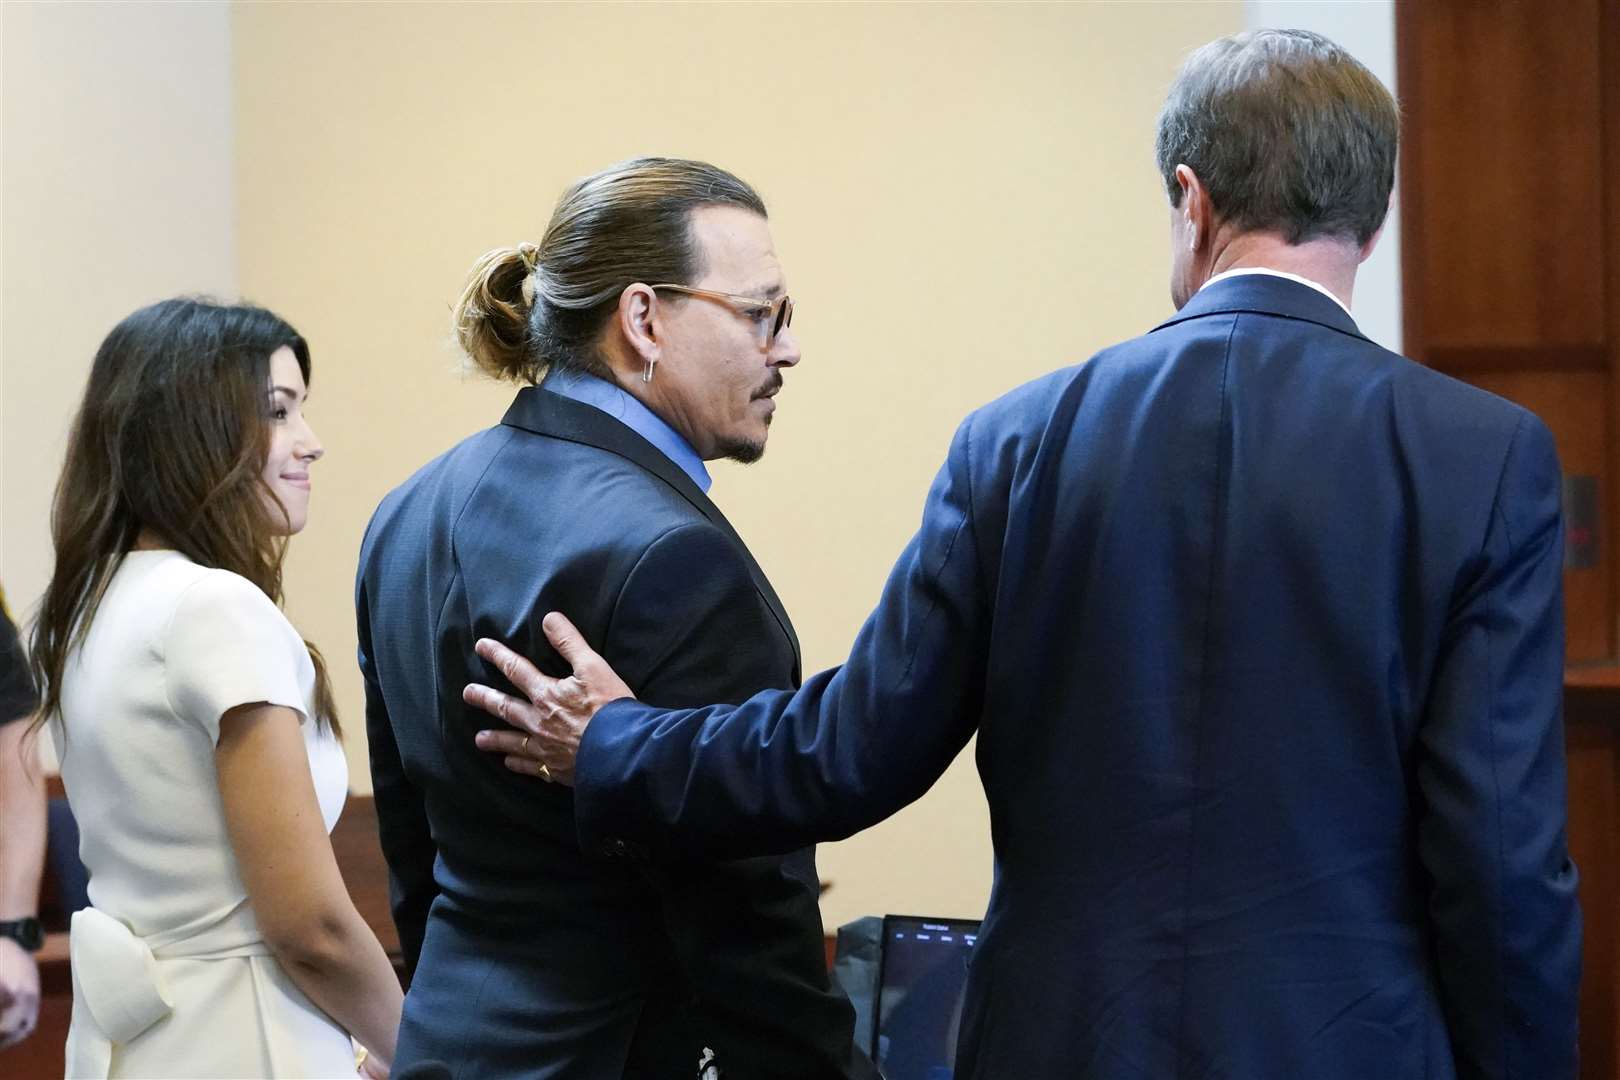 Both Mr Depp and Ms Heard return to the witness stand to give rebuttal evidence before closing arguments are submitted (Steve Helber/AP)